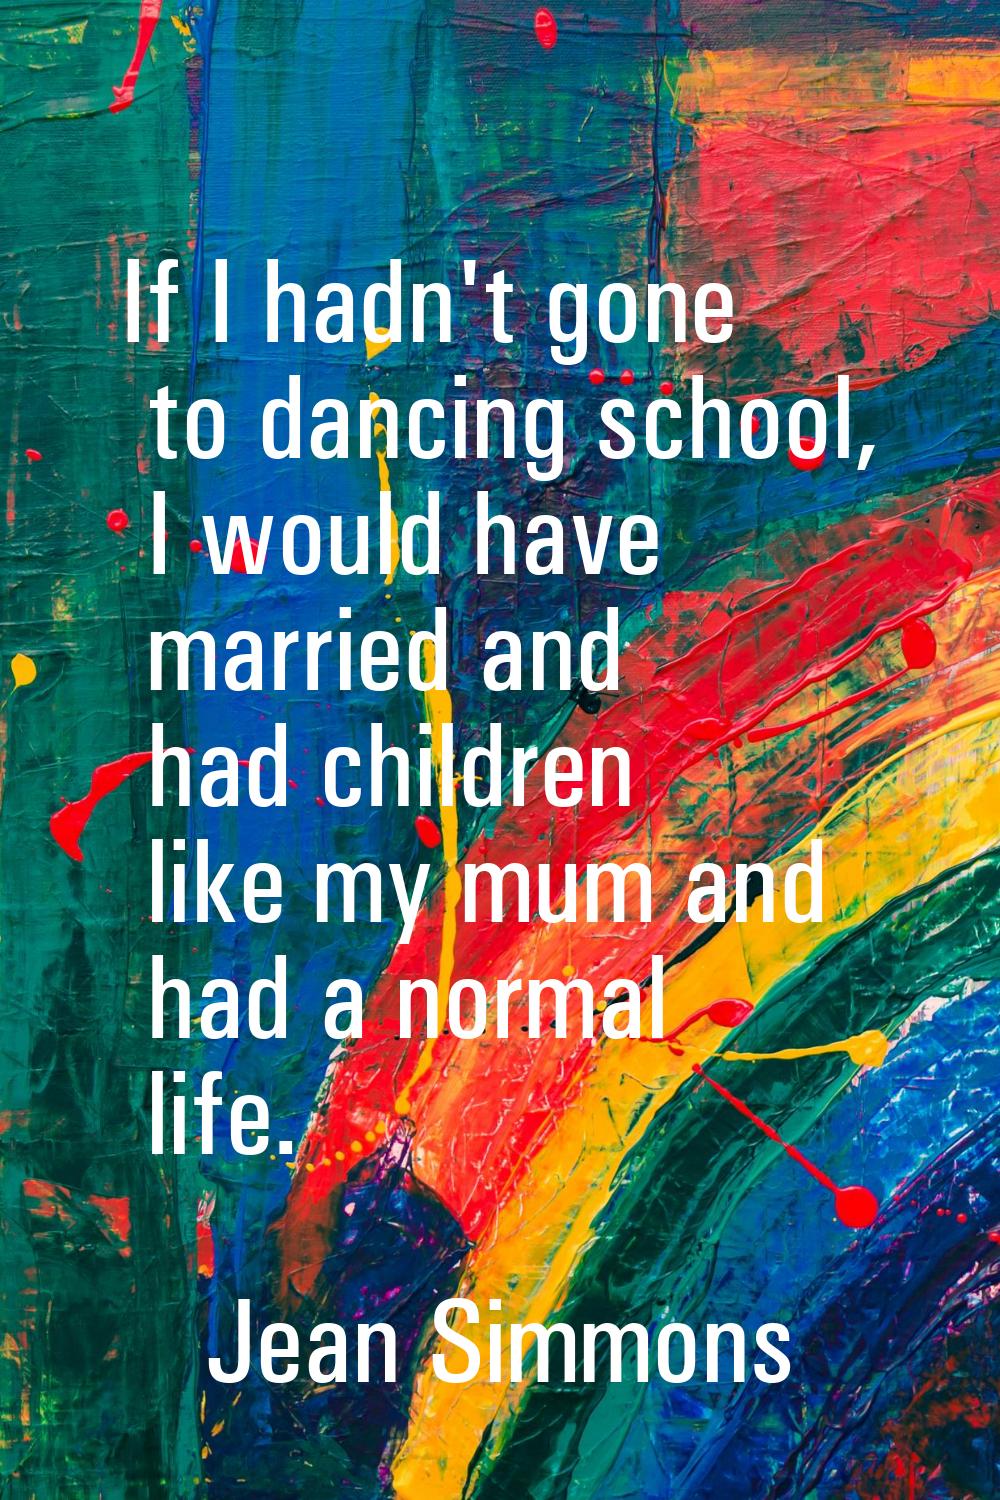 If I hadn't gone to dancing school, I would have married and had children like my mum and had a nor